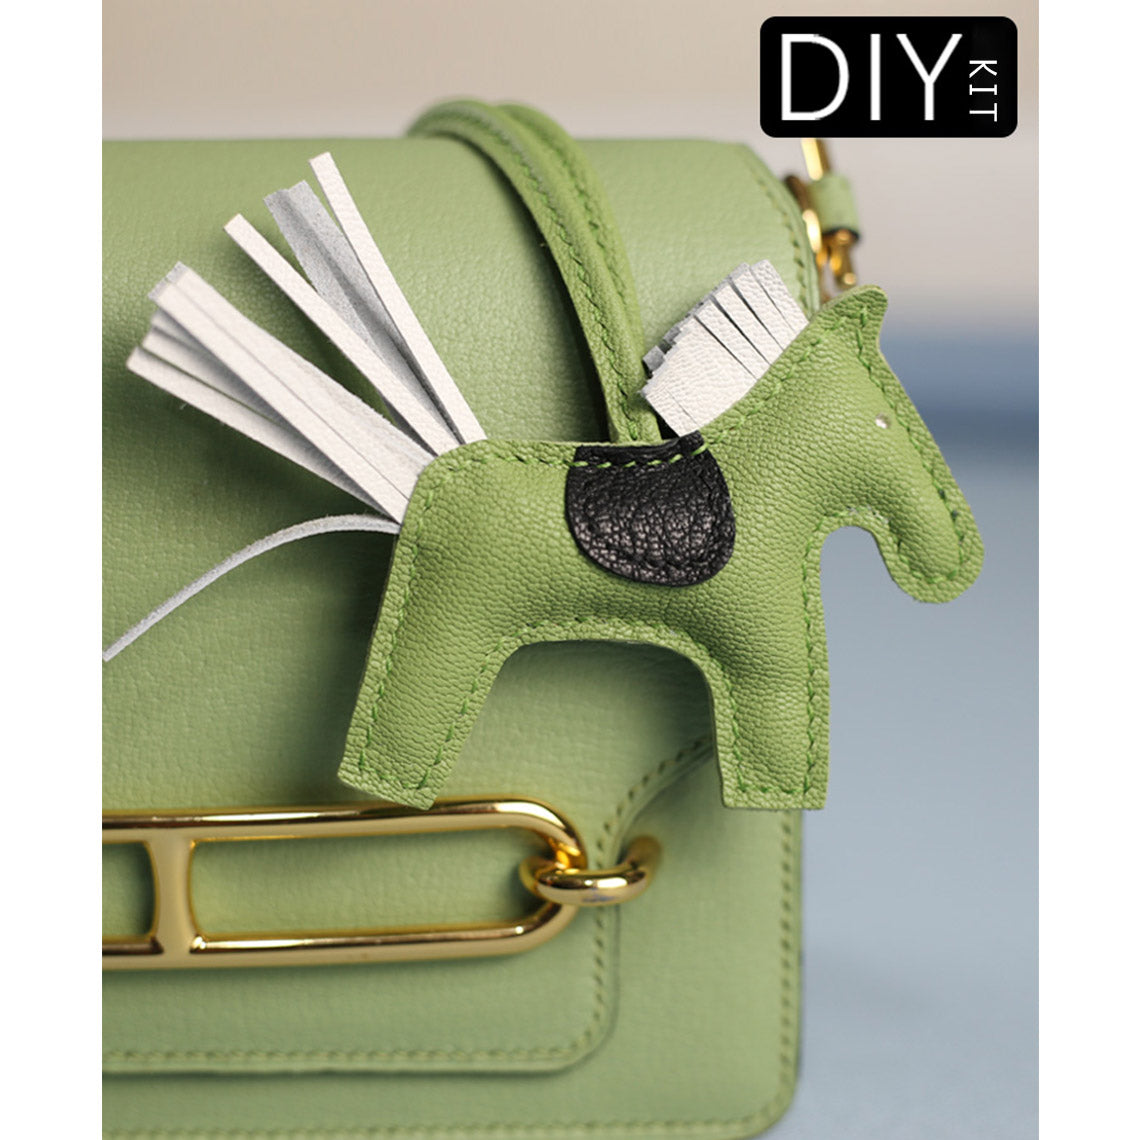 DIY Keychain Kit | Green Leather Horse Bag Charm Keychain - POPSEWING™